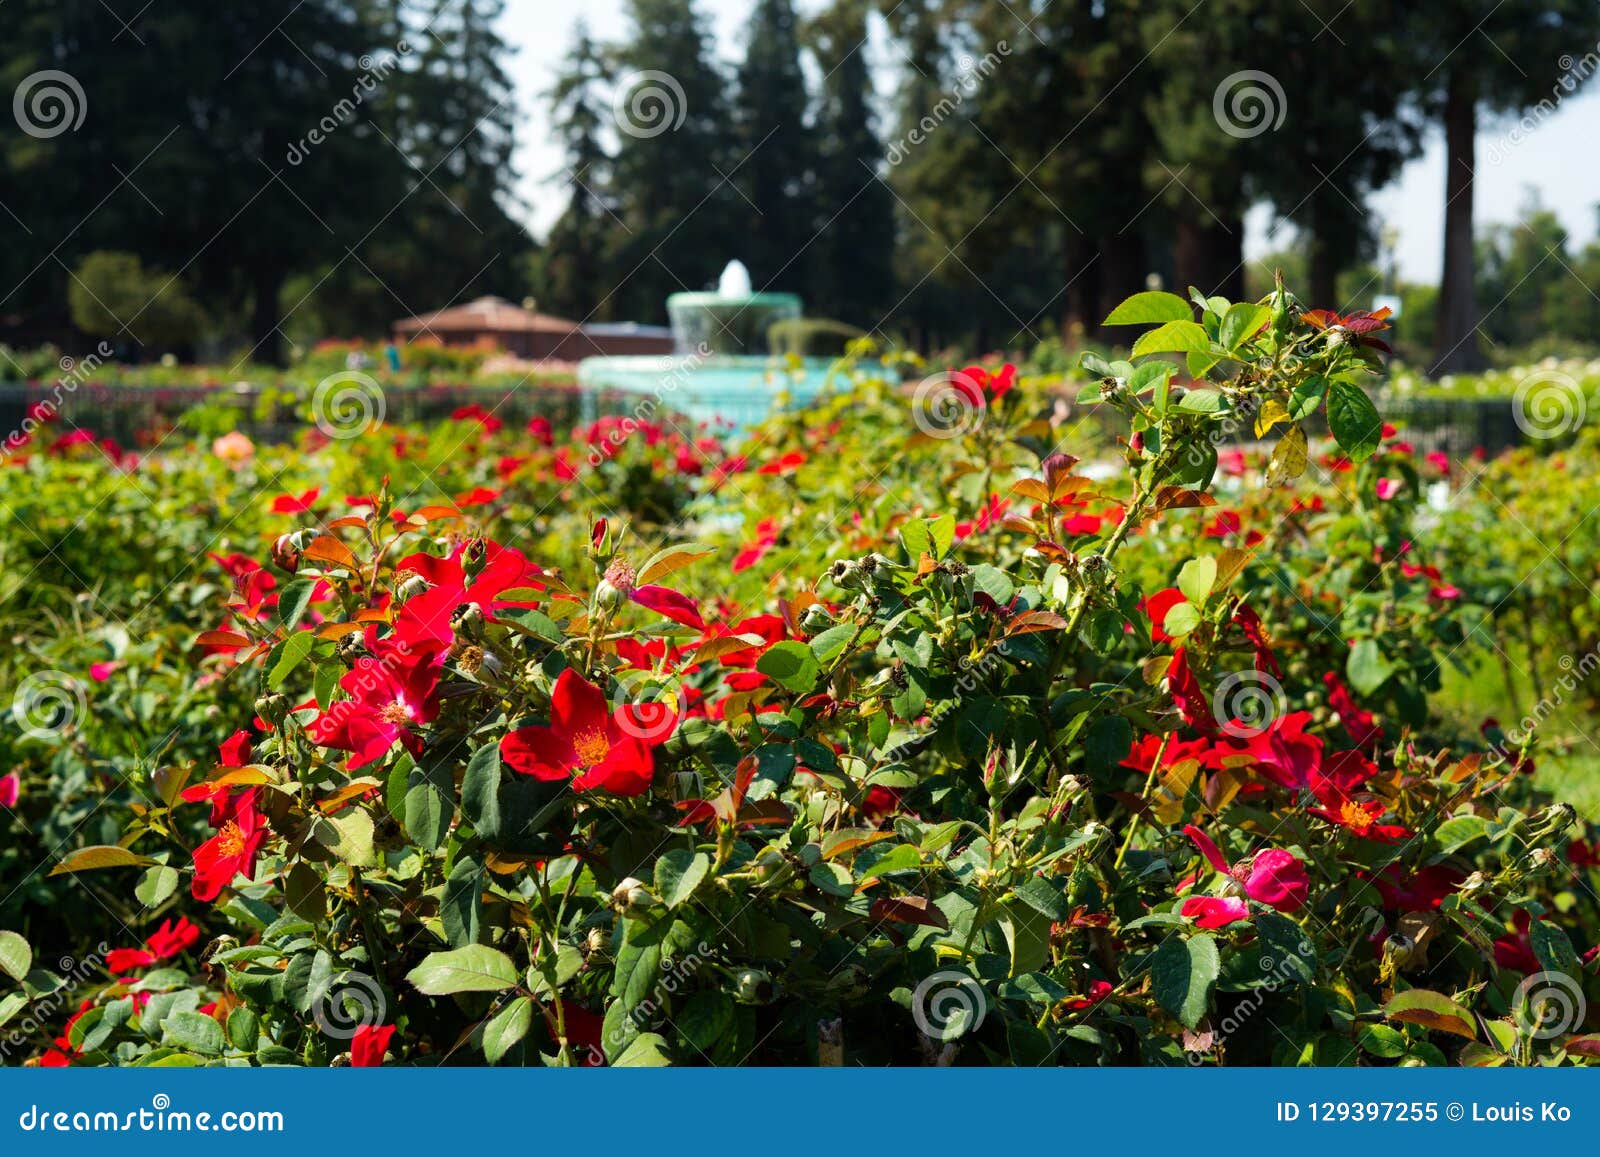 Red Roses Blurry Fountain Background In Rose Gardens Stock Image